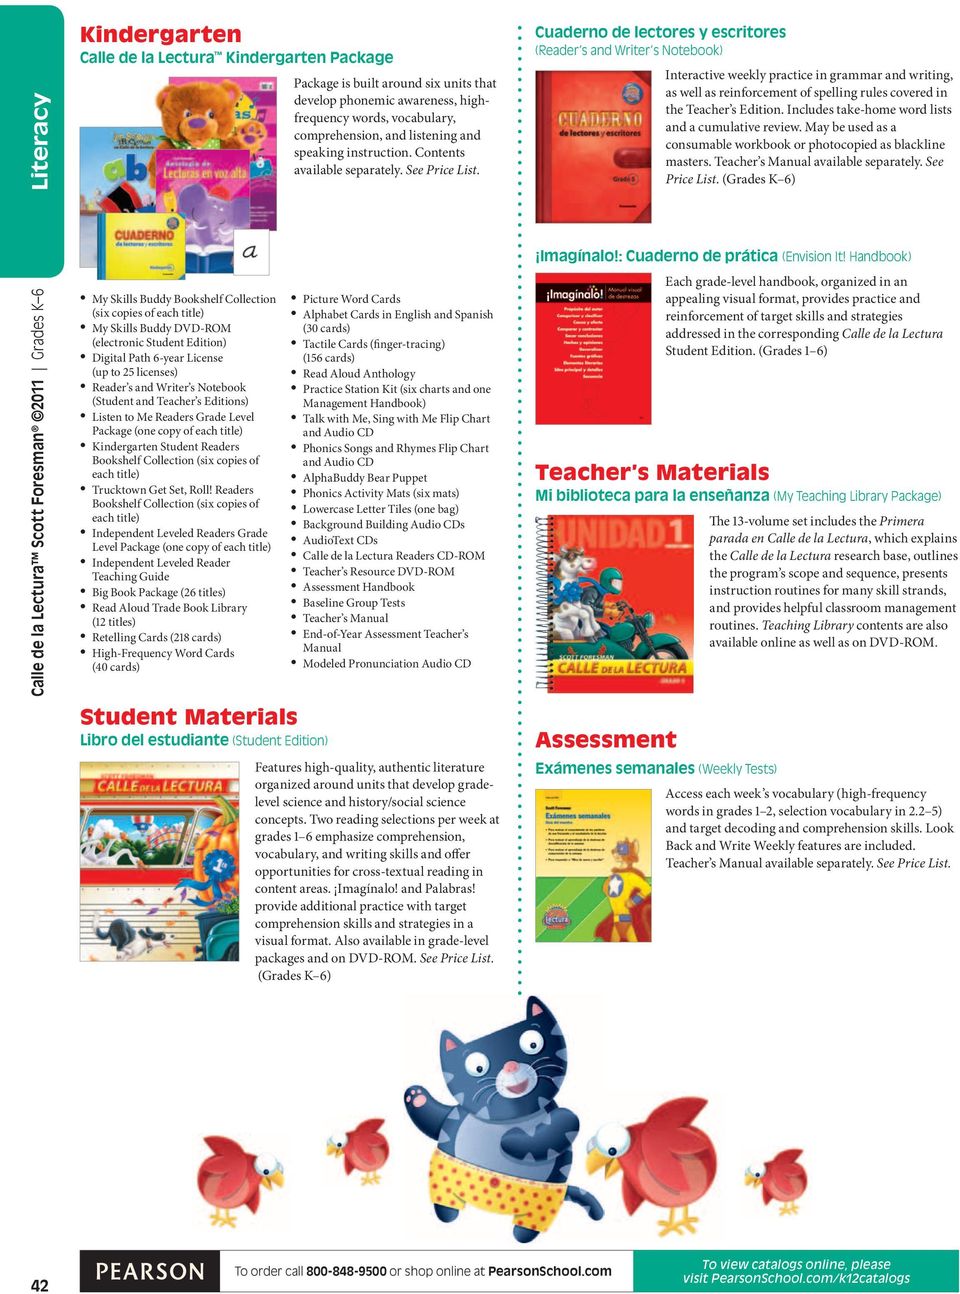 Cuaderno de lectores y escritores (Reader s and Writer s Notebook) Interactive weekly practice in grammar and writing, as well as reinforcement of spelling rules covered in the Teacher s Edition.